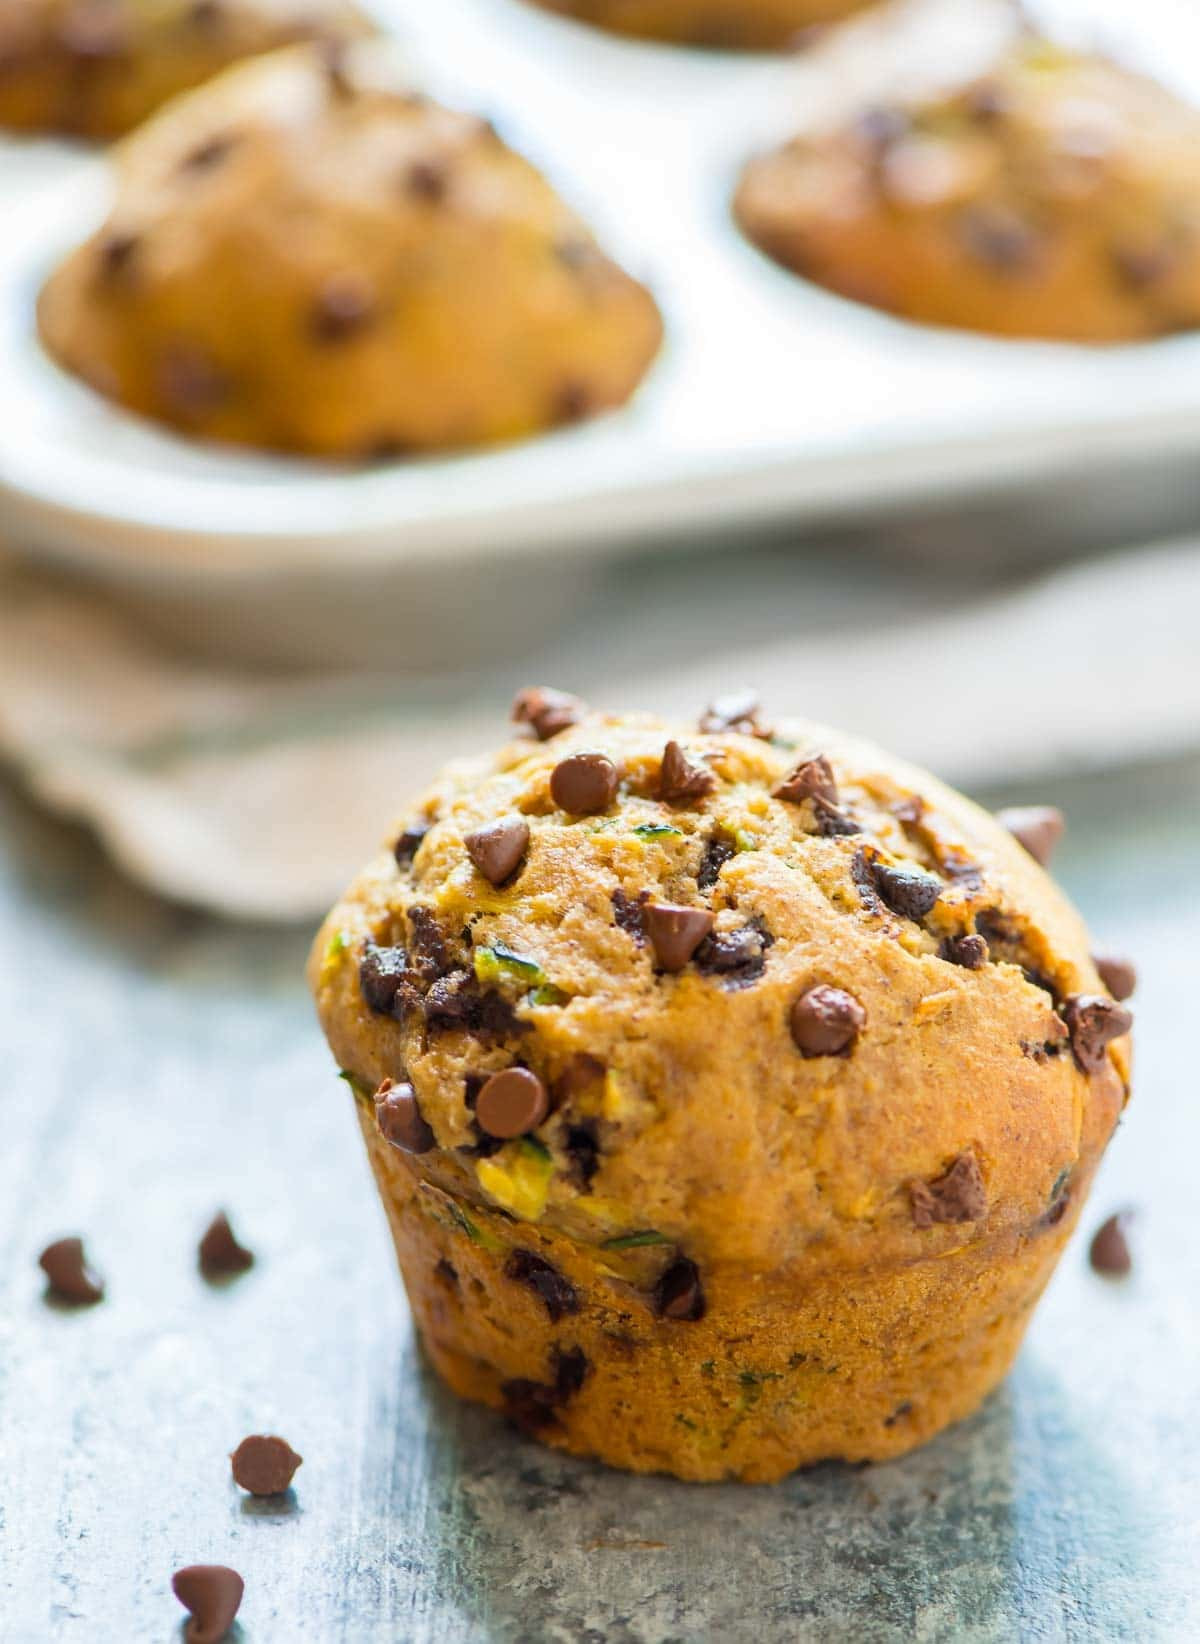 Zucchini Muffins Healthy
 Healthy Zucchini Muffins with Chocolate Chips